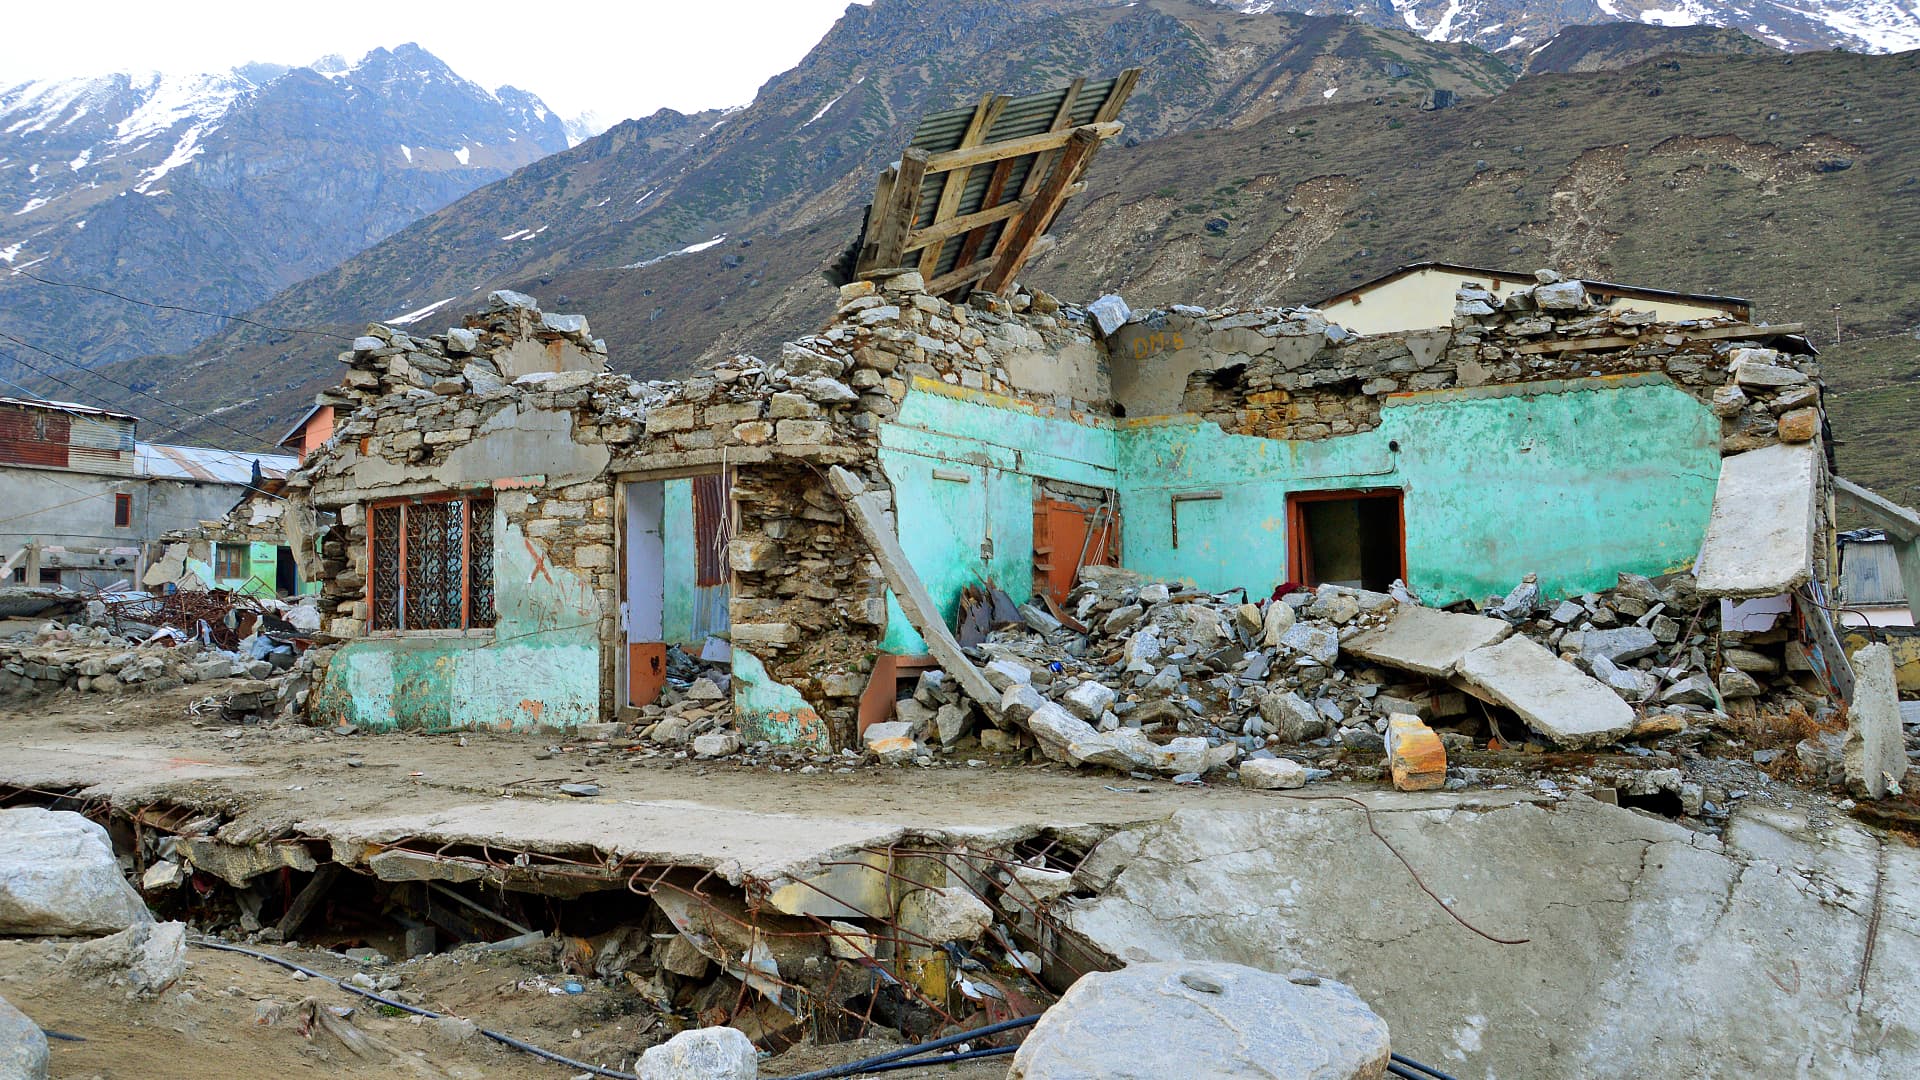 The rockslide caused deadly floods in the Himalayas